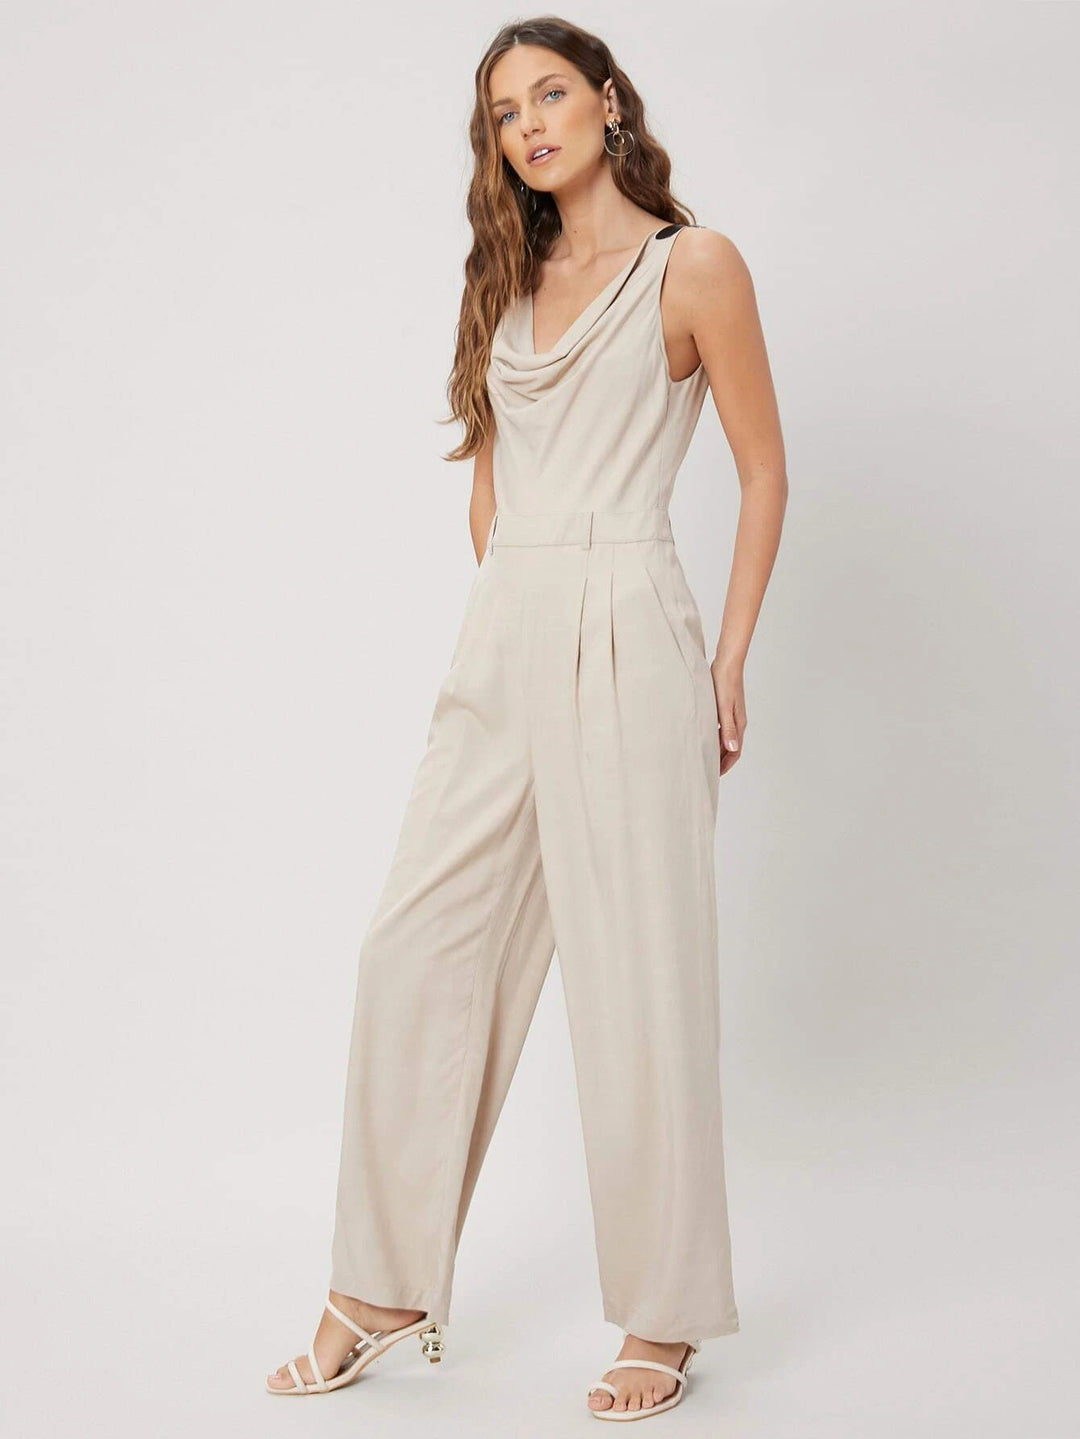 Apricot Colored Linen Sleeveless Jumpsuit